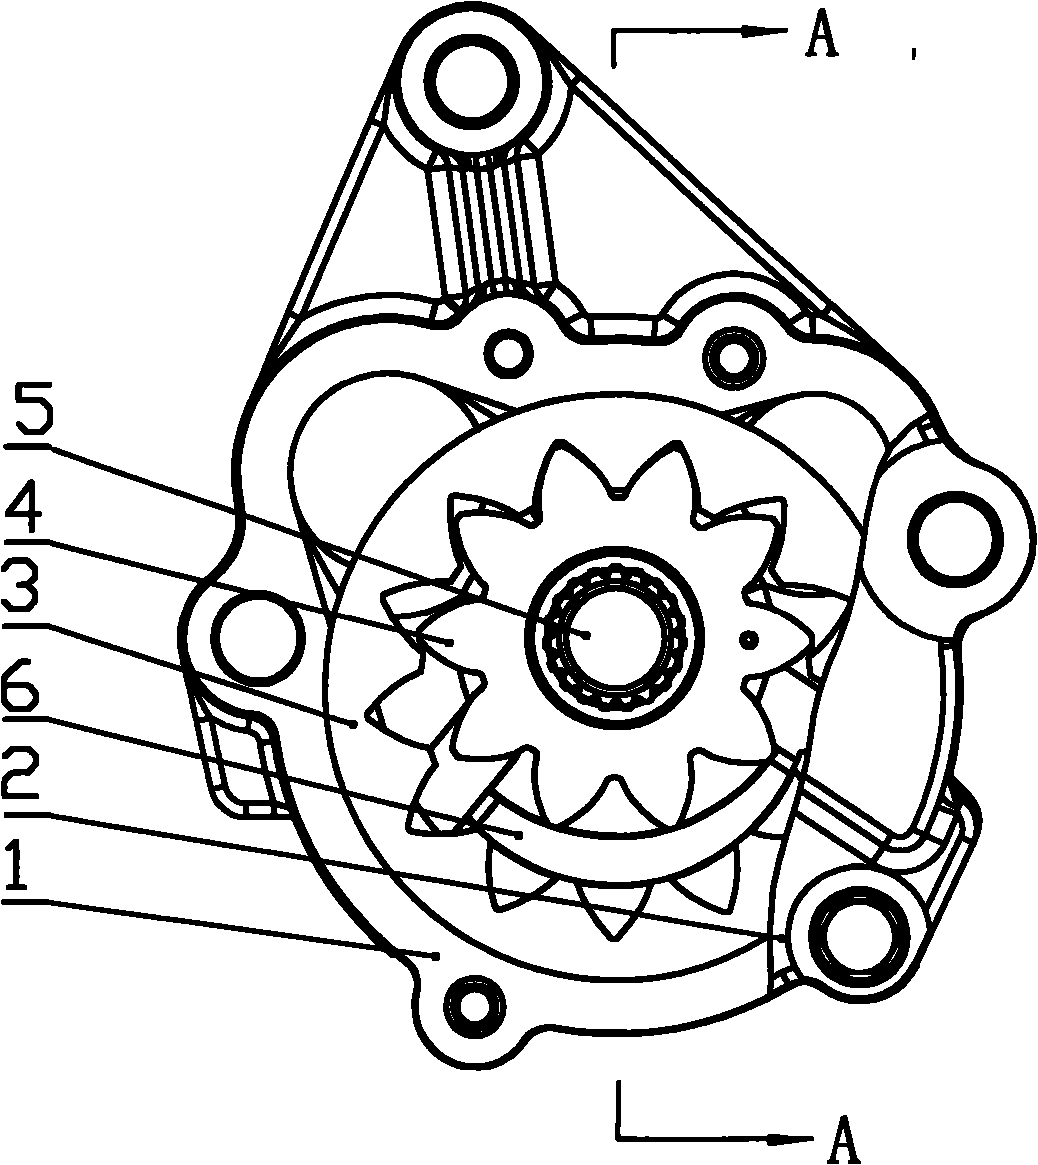 Oil pump with inside engaged gear